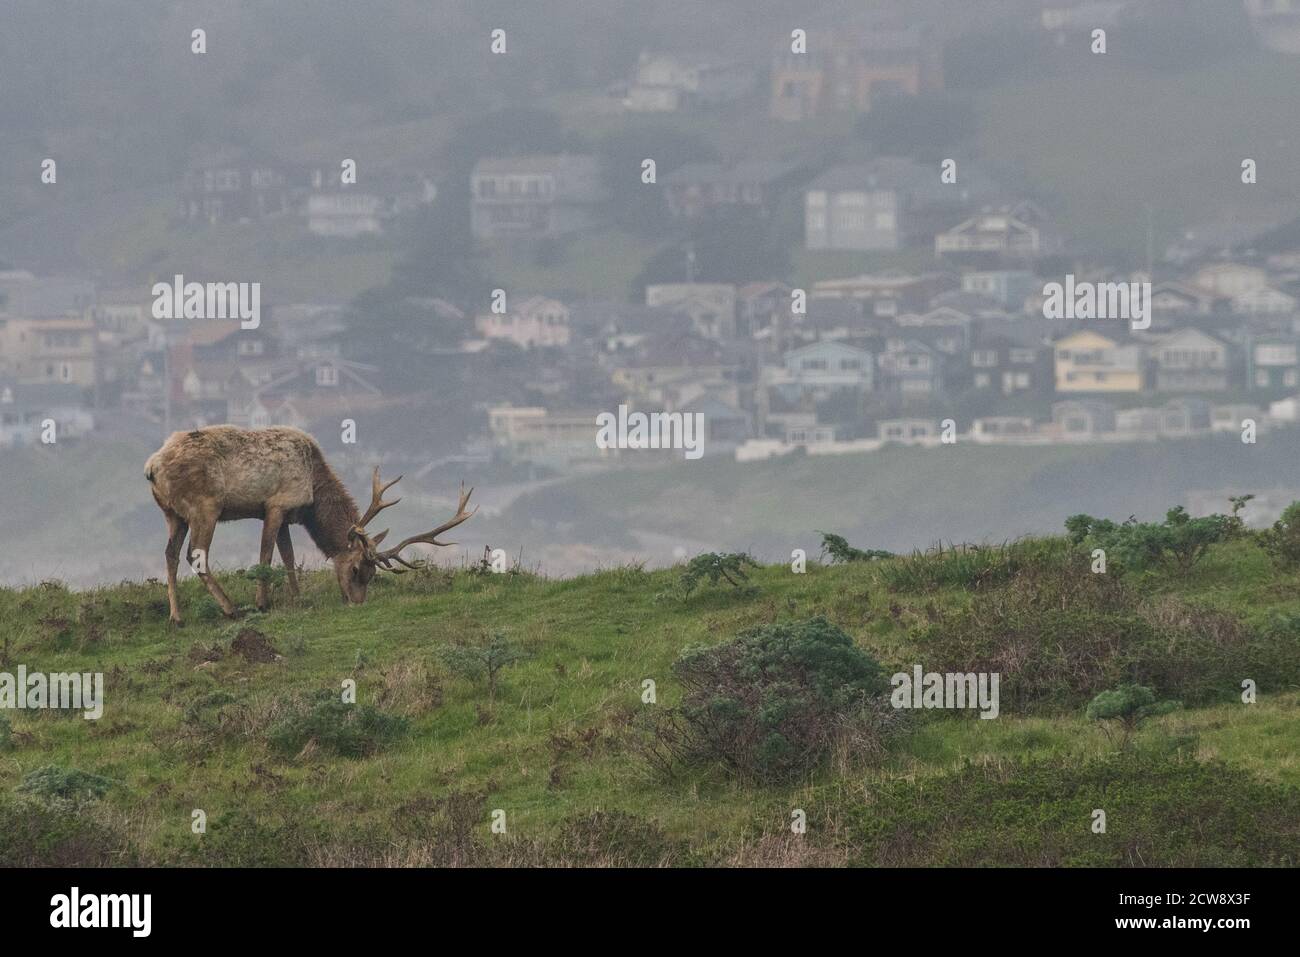 A tule elk (Cervus canadensis nannodes) grazing with buildings visible in the background, at Pt. Reyes National Seashore in California. Stock Photo